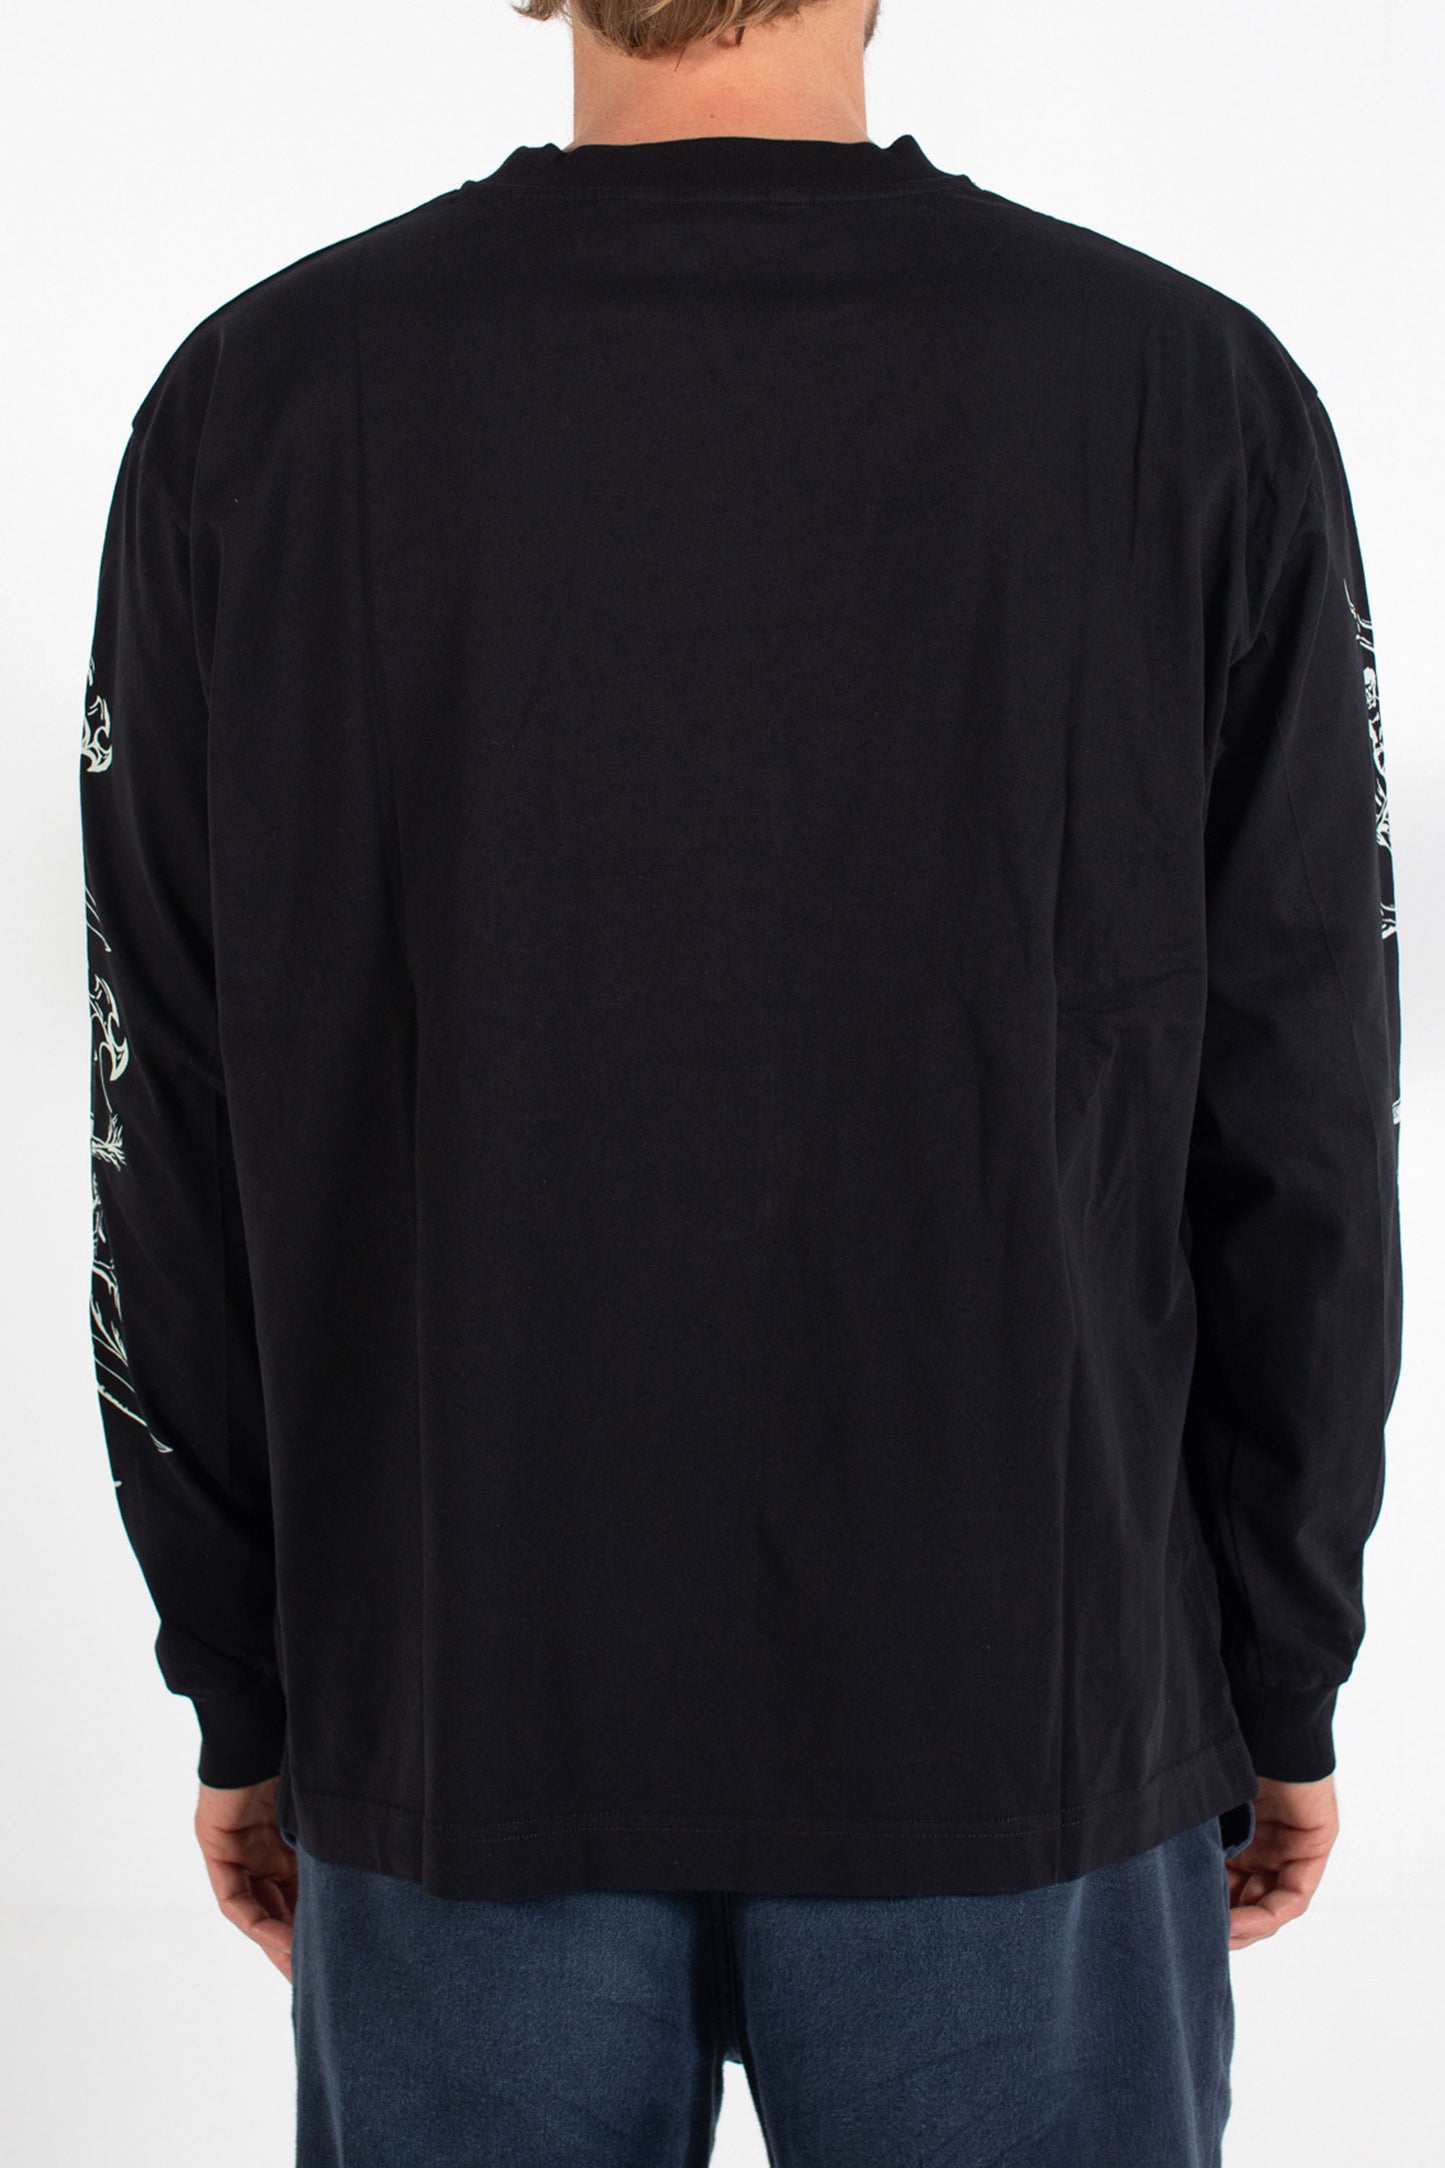 
                  
                    Pukas-Surf-Shop-surfing-the-basque-country-tee-black-3-surfers
                  
                